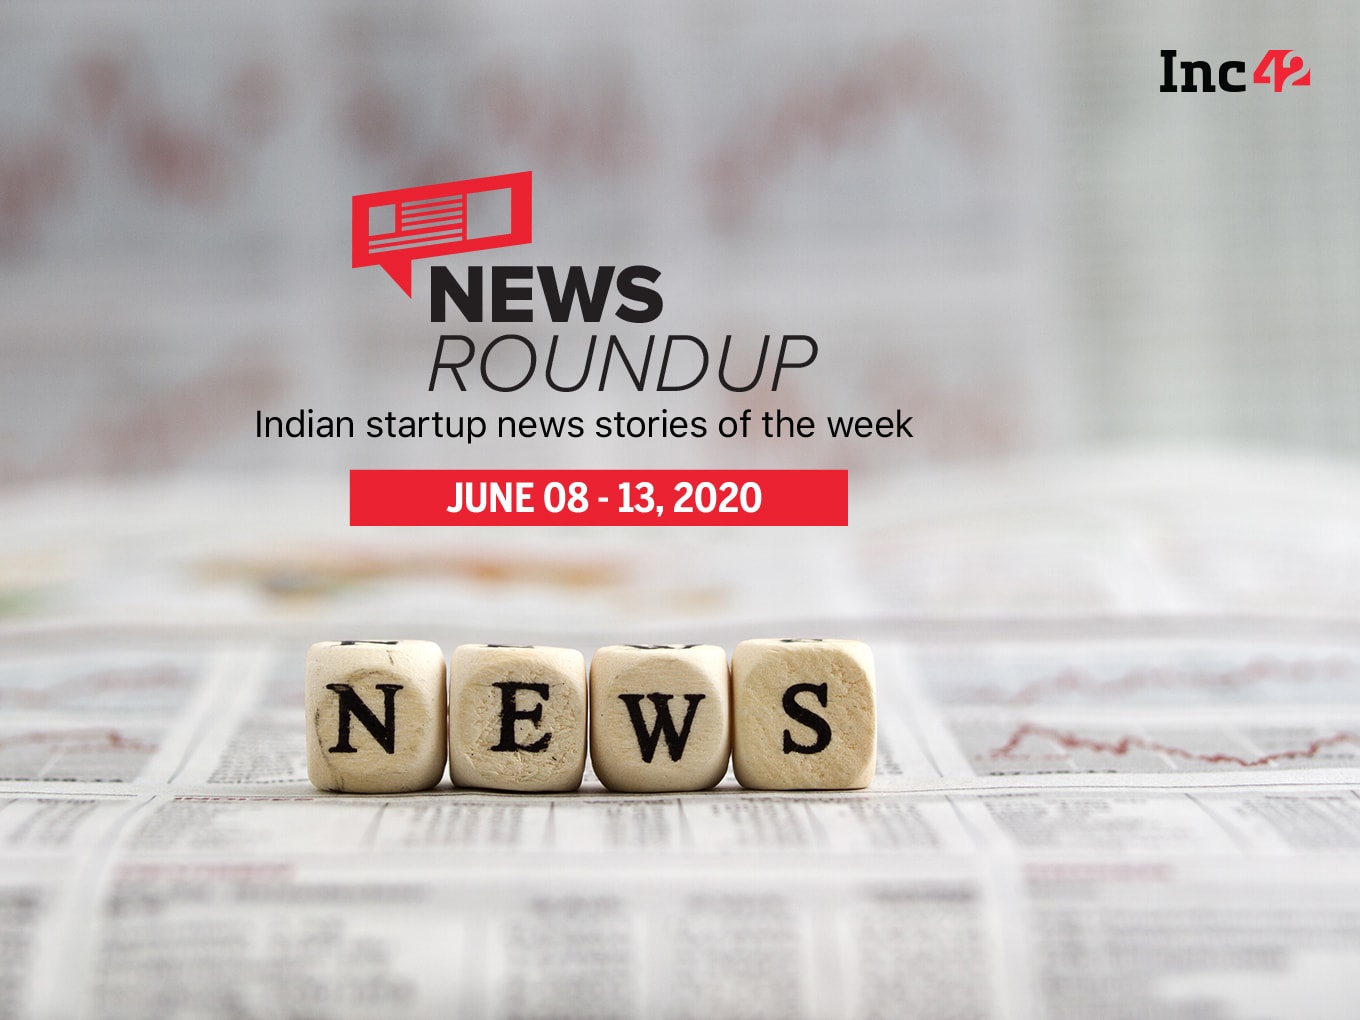 News Roundup: 11 Indian Startup News Stories You Don’t Want To Miss This Week [June 8 - 13]